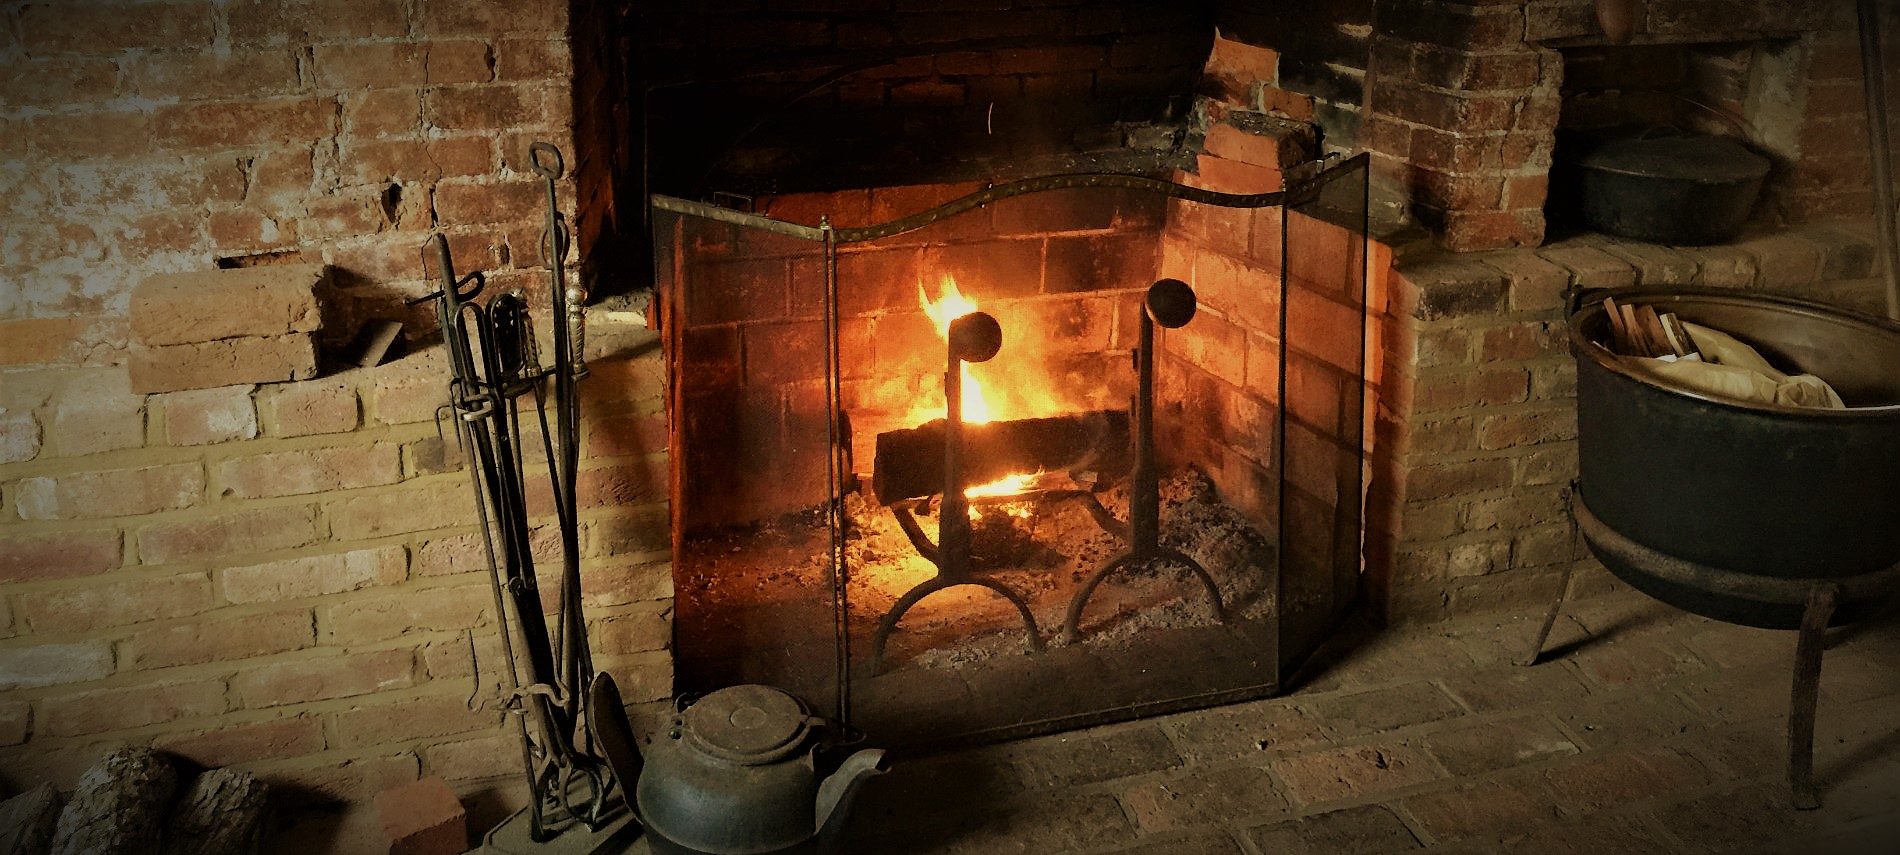 A fire gently burning in the OCBB's fireplace